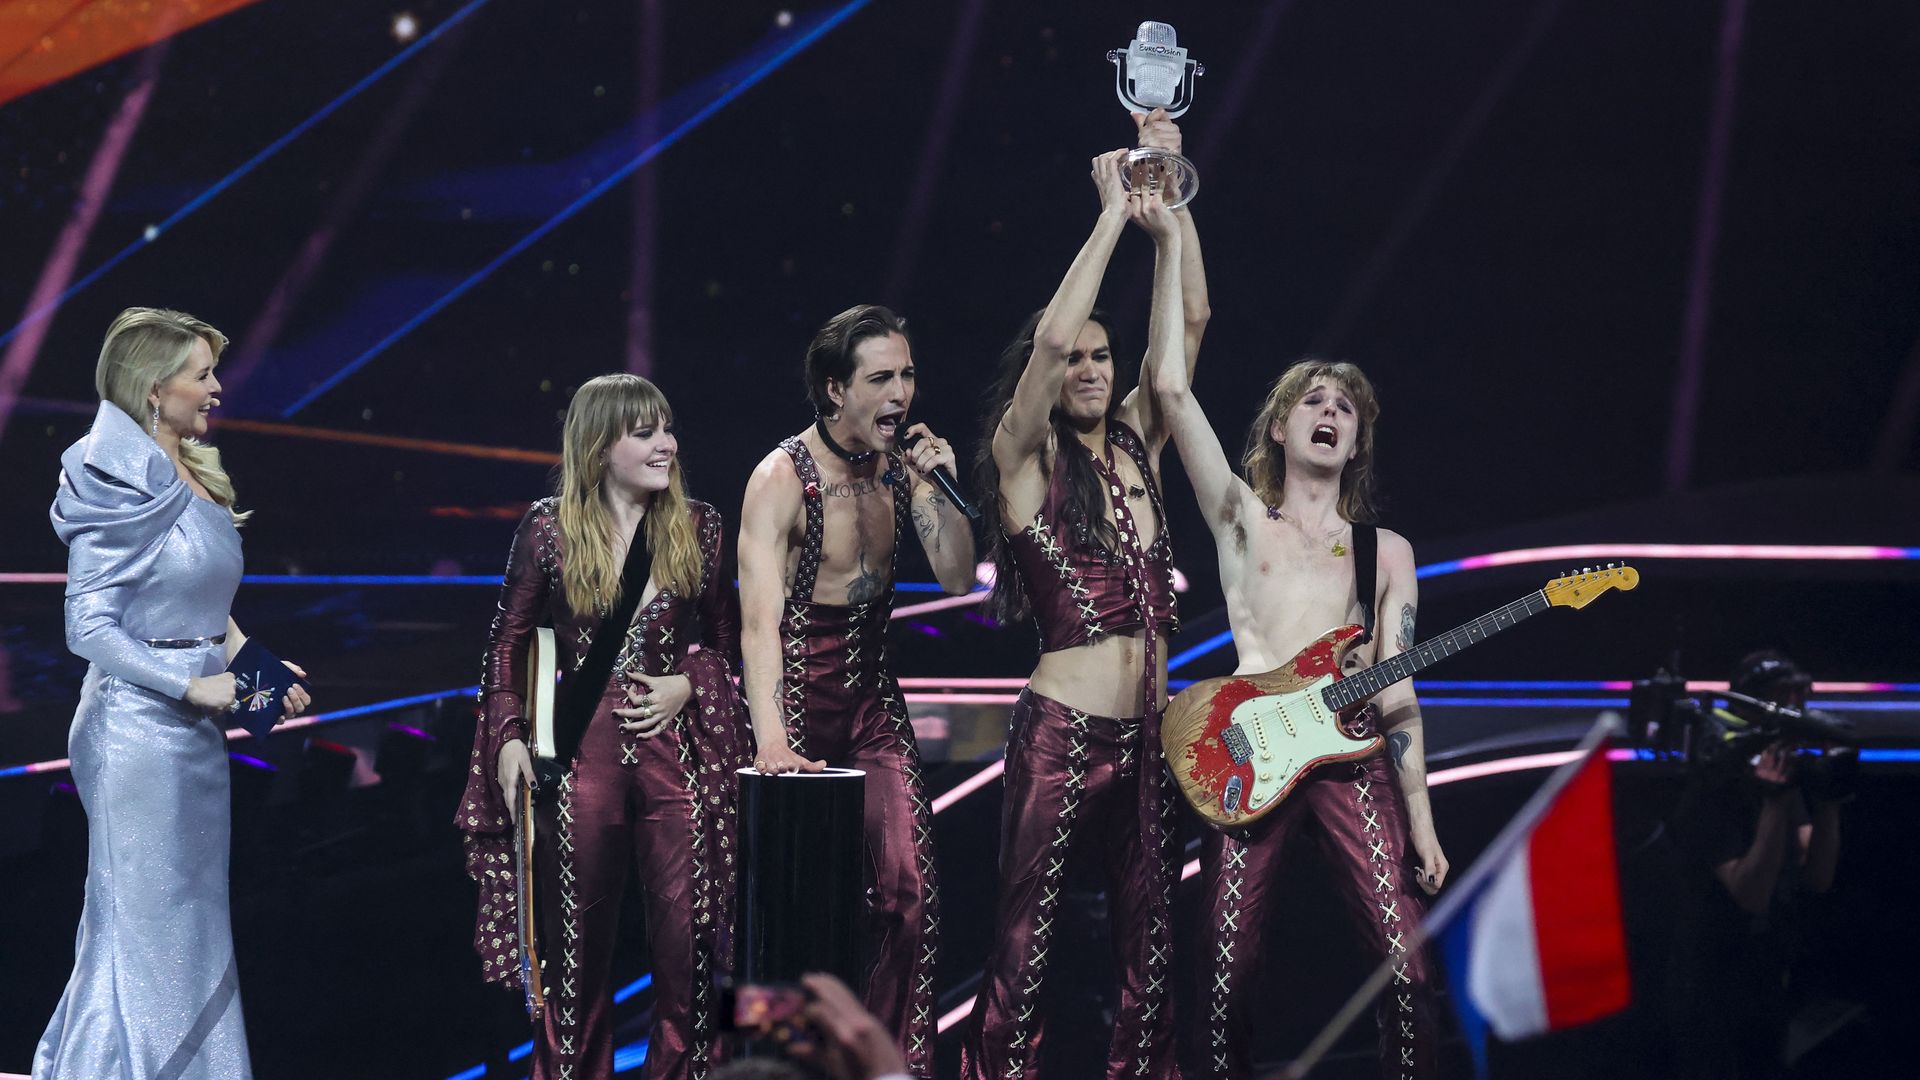  Italy's Maneskin celebrates after winning the final of the 65th edition of the Eurovision Song Contest 2021, at the Ahoy convention centre in Rotterdam, on May 22